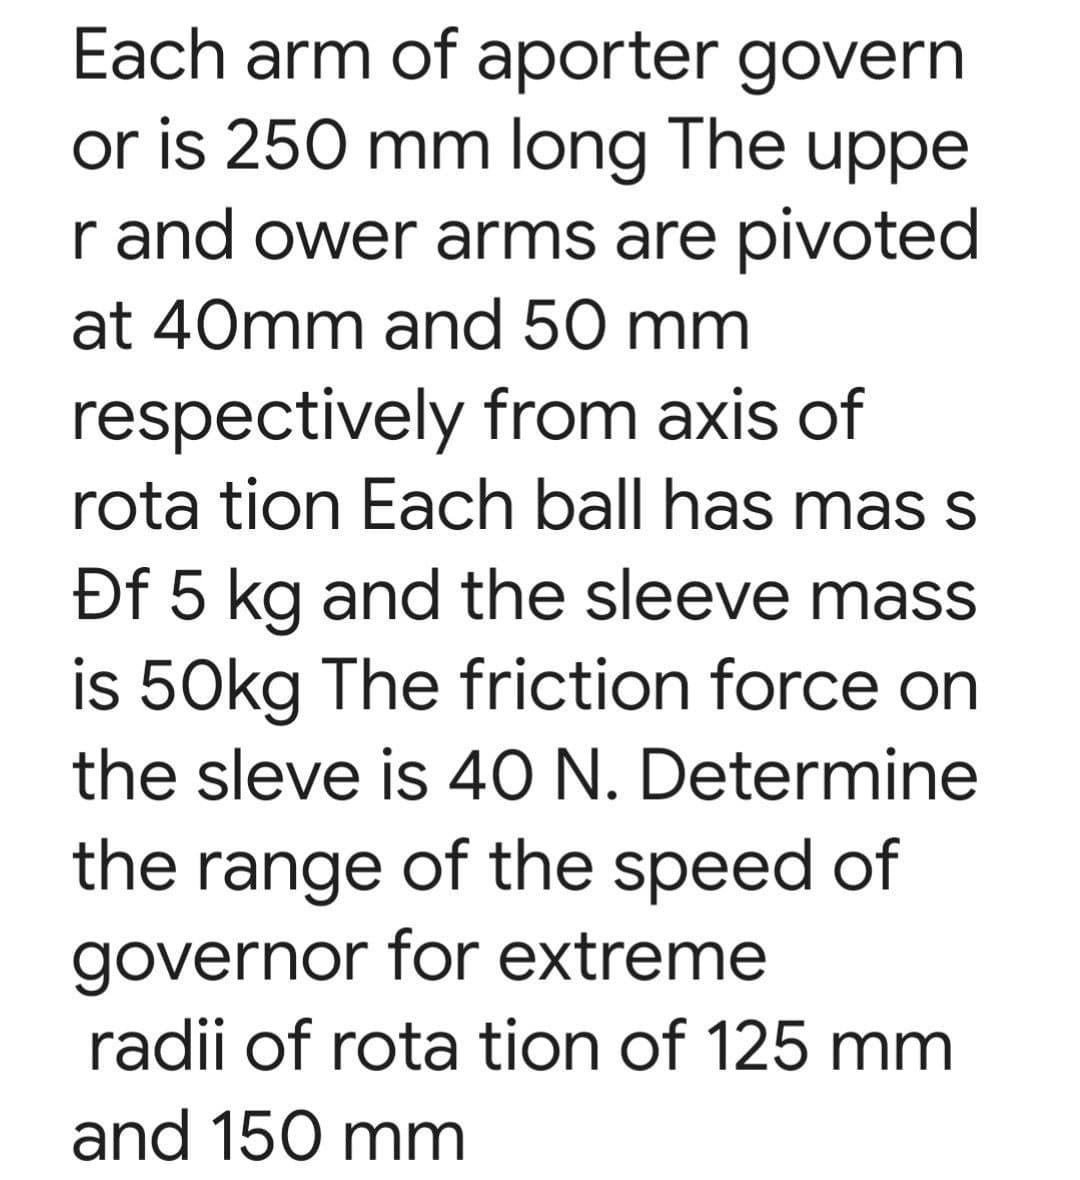 Each arm of aporter govern
or is 250 mm long The uppe
r and ower arms are pivoted
at 40mm and 50 mm
respectively from axis of
rota tion Each ball has mas s
Df 5 kg and the sleeve mass
is 50kg The friction force on
the sleve is 40 N. Determine
the range of the speed of
governor for extreme
radii of rota tion of 125 mm
and 150 mm